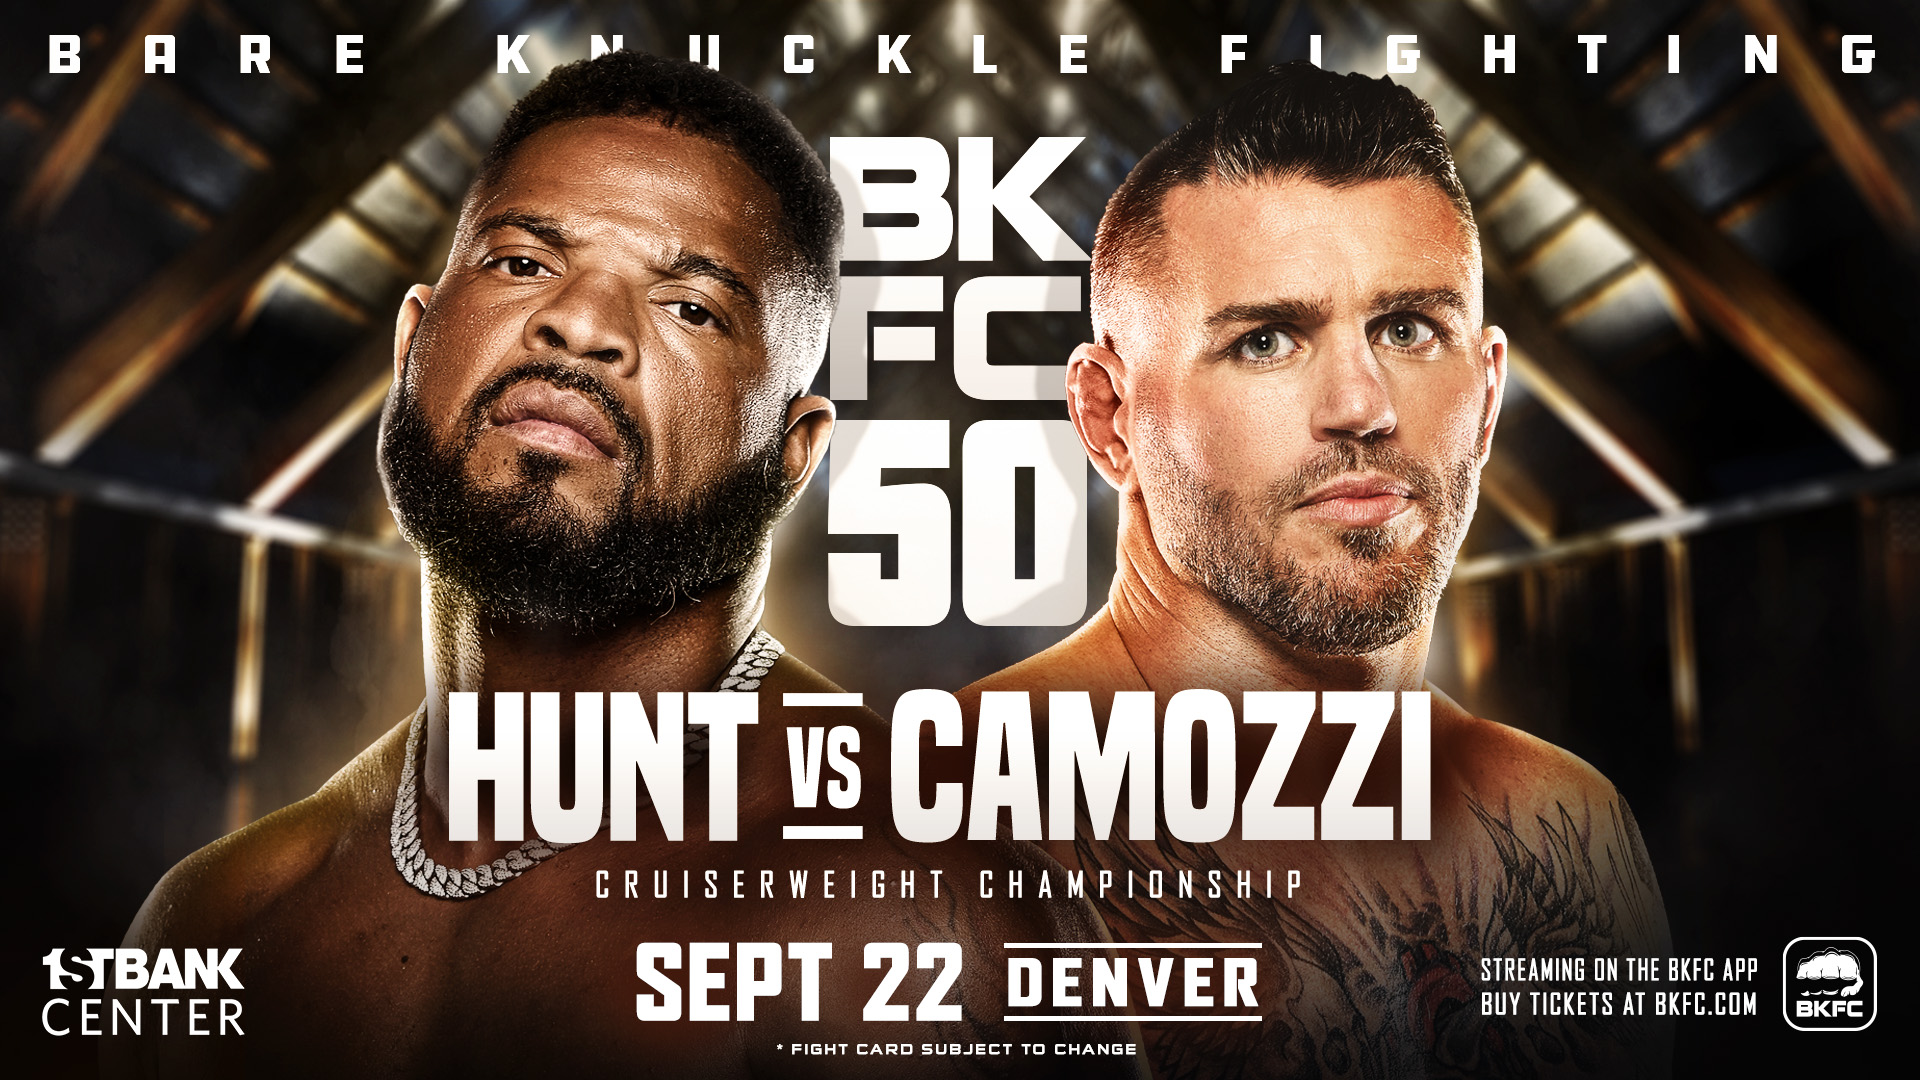 BKFC 50 LIVE Stream and Results